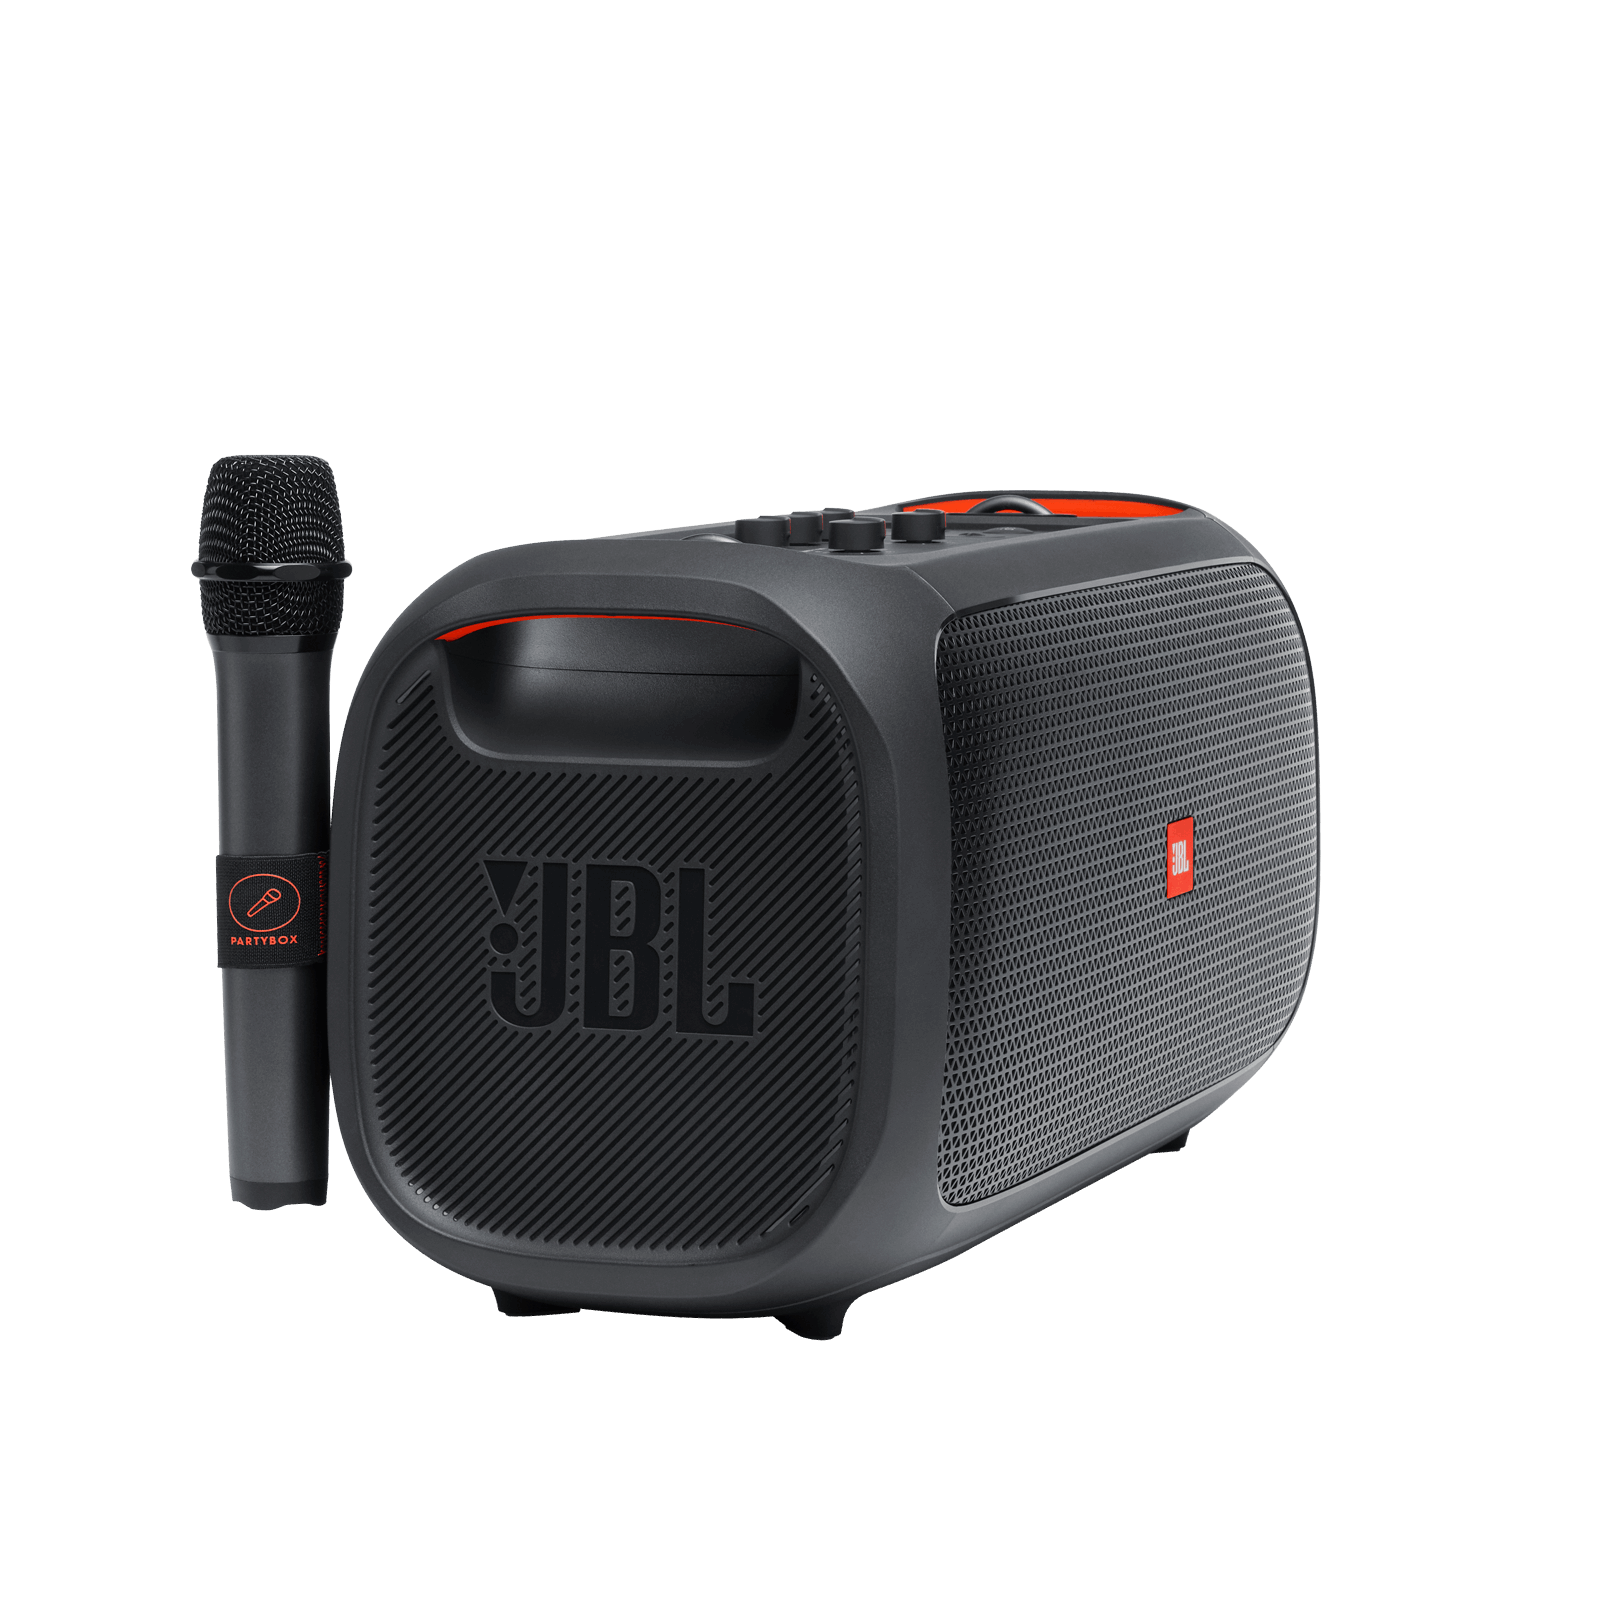 JBL PARTYBOX ON-THE-GO Portable party speaker with built-in lights and 2x Wireless Microphone